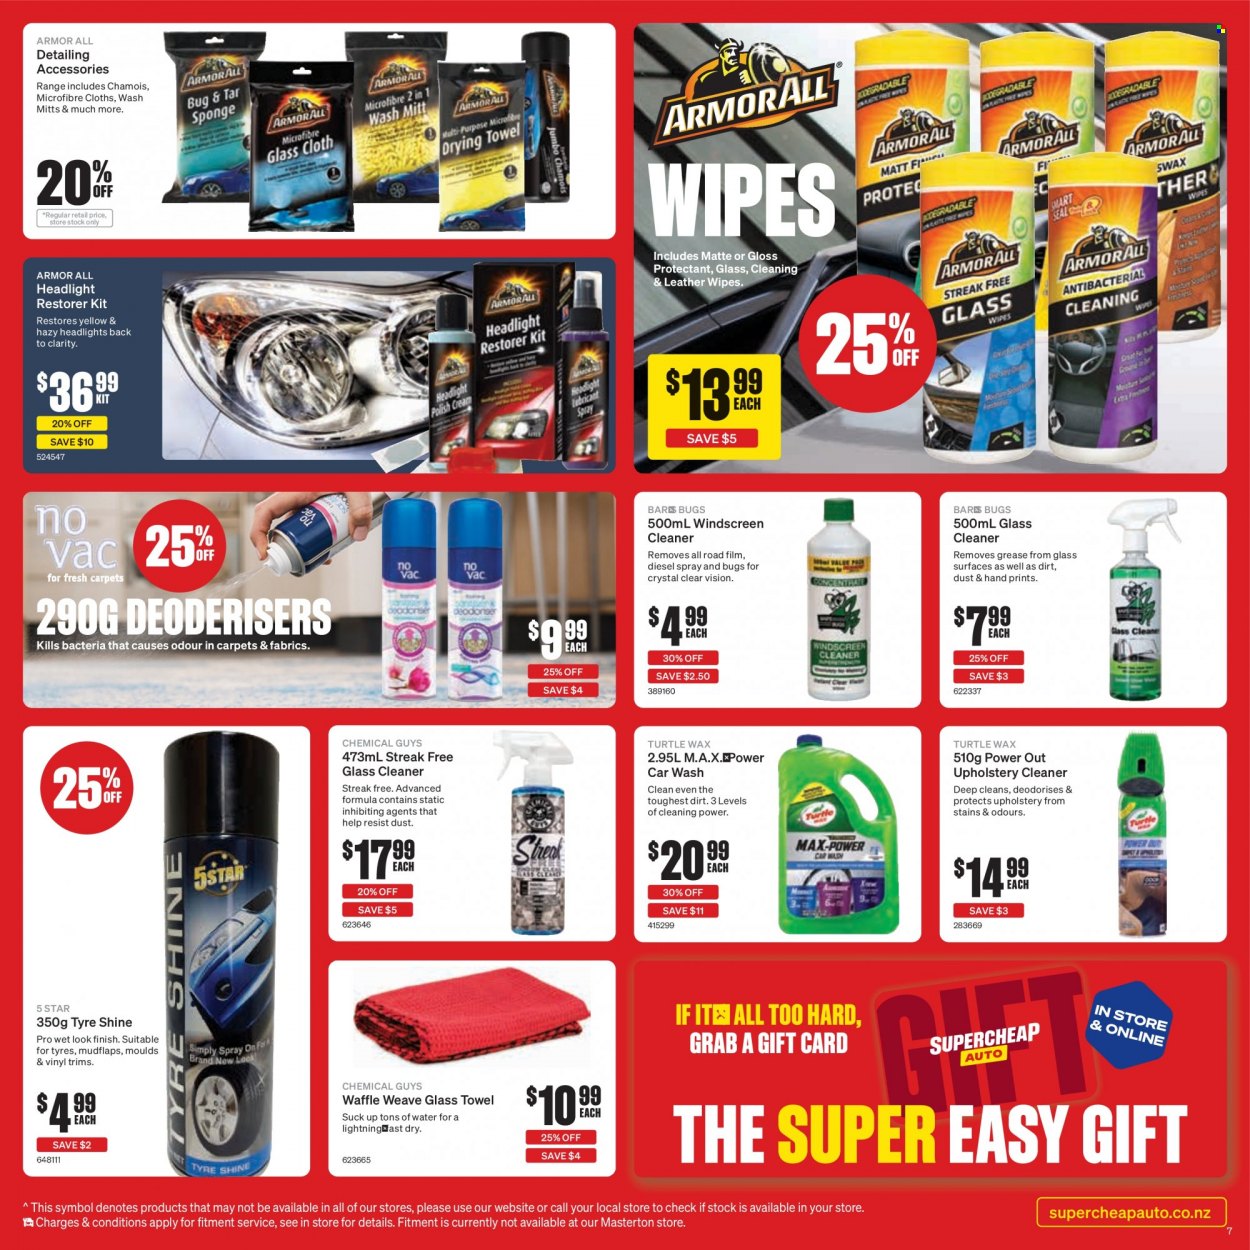 thumbnail - SuperCheap Auto mailer - 01.12.2022 - 11.12.2022 - Sales products - wipes, cleaner, glass cleaner, headlamp, Armor All, tyre shine, tires. Page 8.